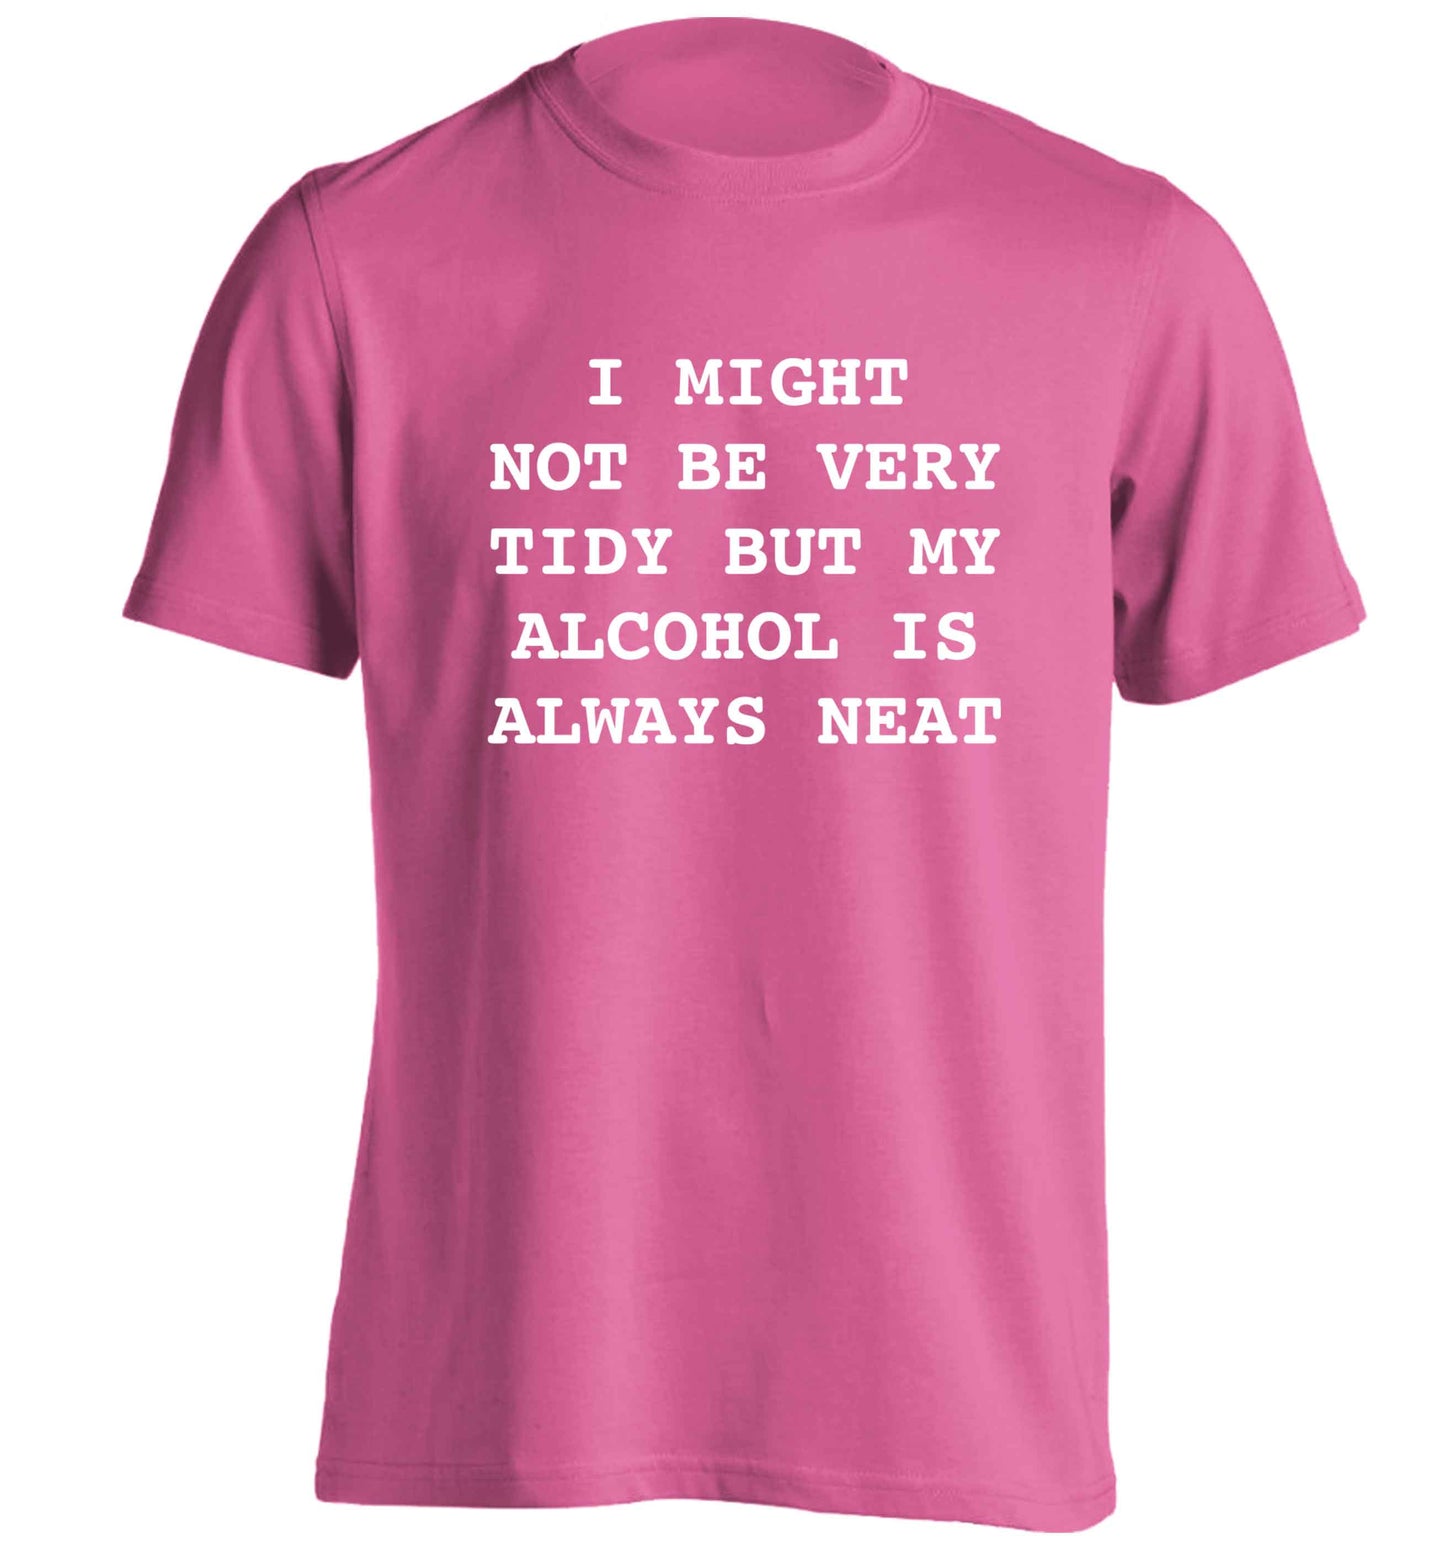 I might not be tidy but my alcohol is always neat adults unisex pink Tshirt 2XL